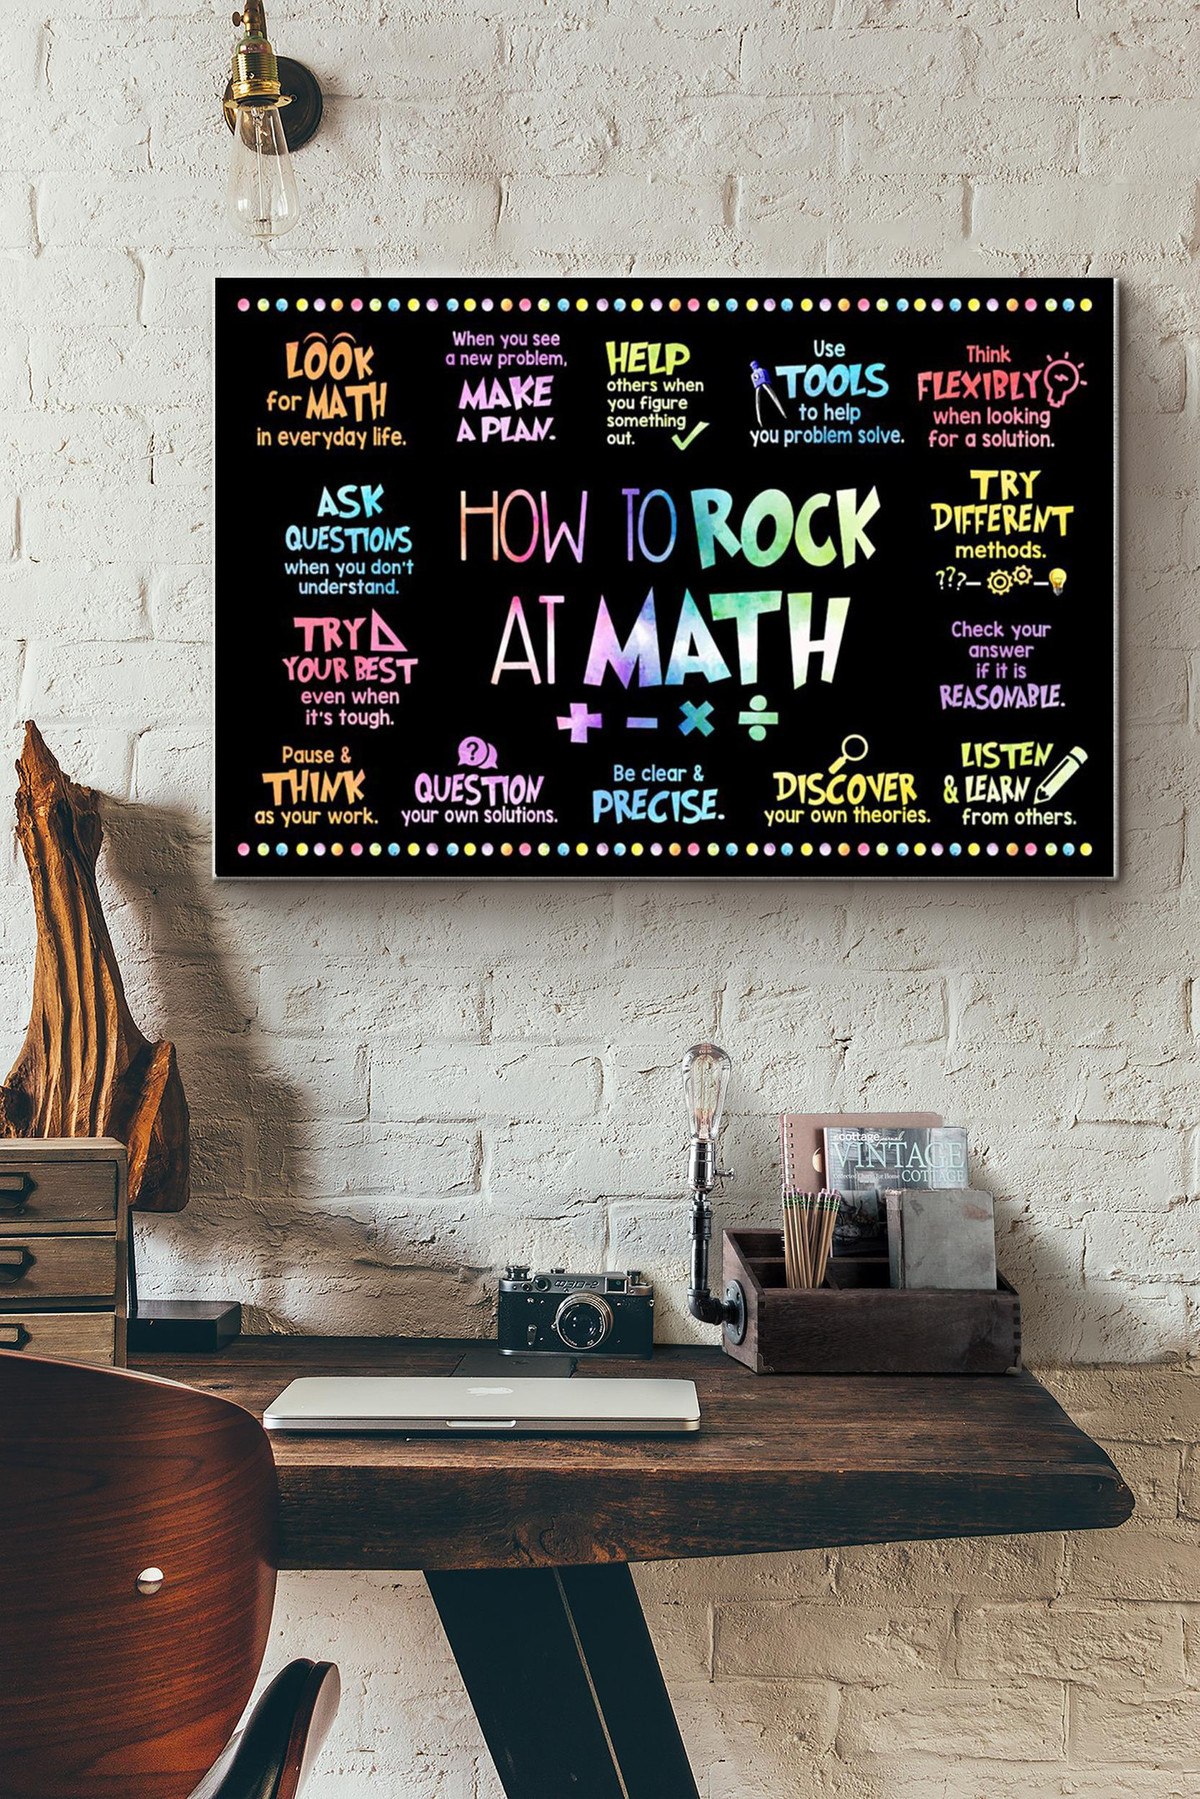 How To Rock At Math Canvas Painting Ideas, Canvas Hanging Prints, Gift Idea Framed Prints, Canvas Paintings Wrapped Canvas 8x10